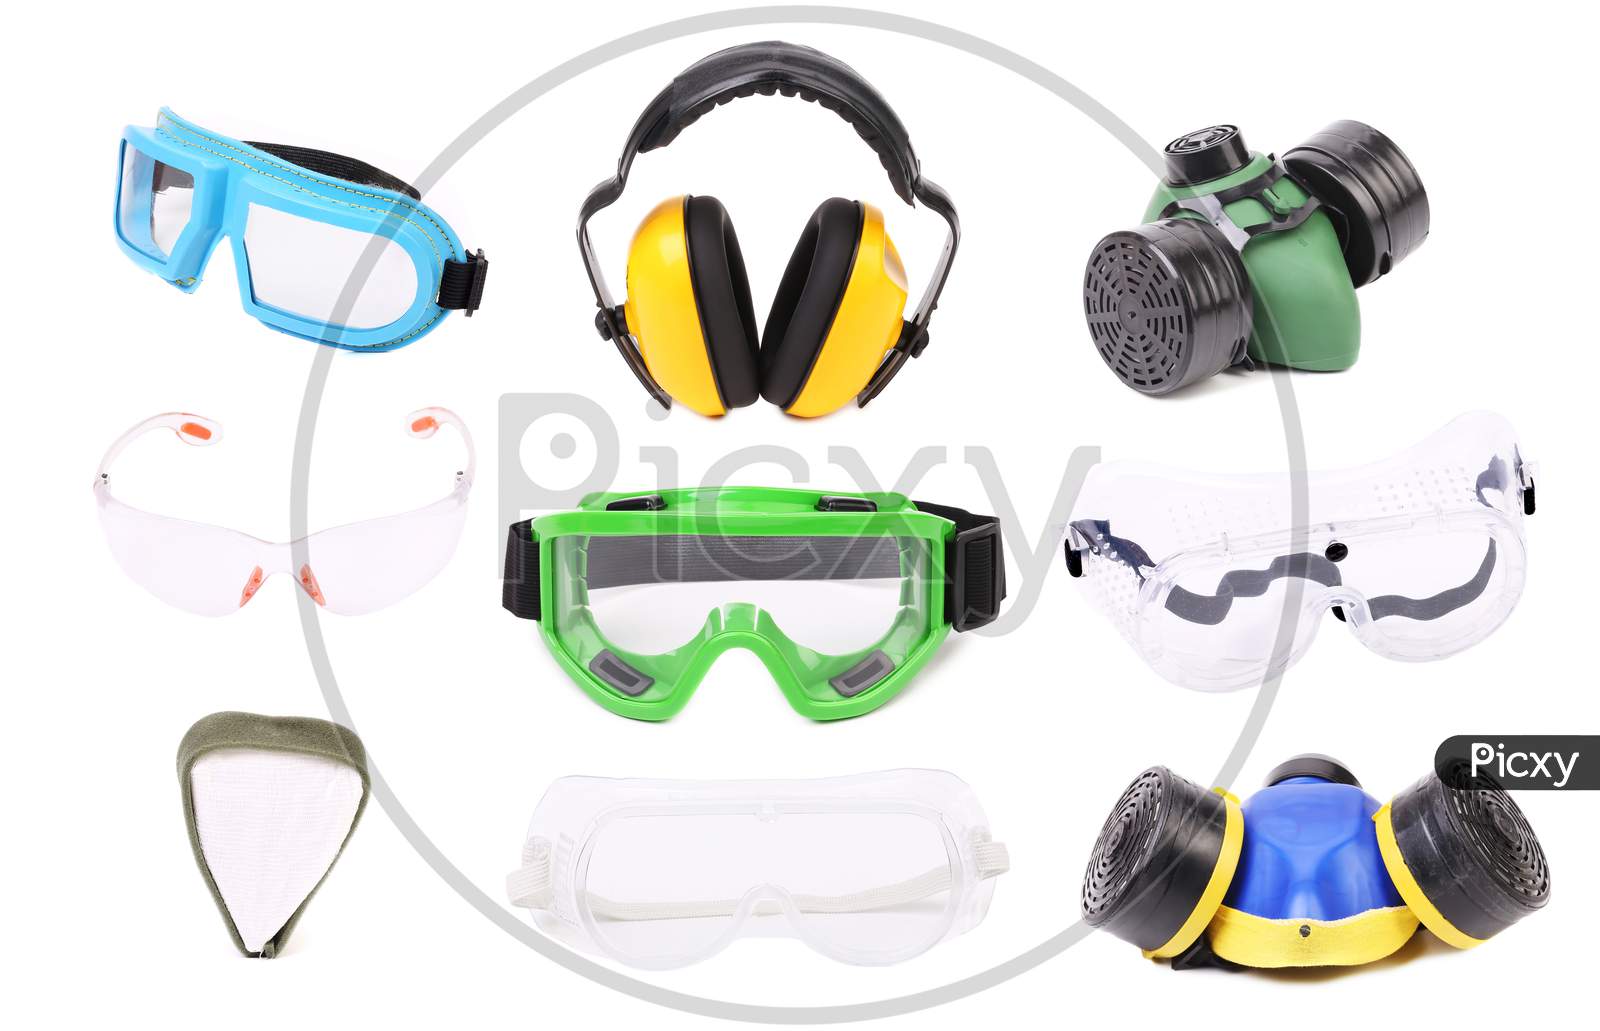 Collage Of Gas Mask Earmuffs And Glasses. Isolated On A White Background.